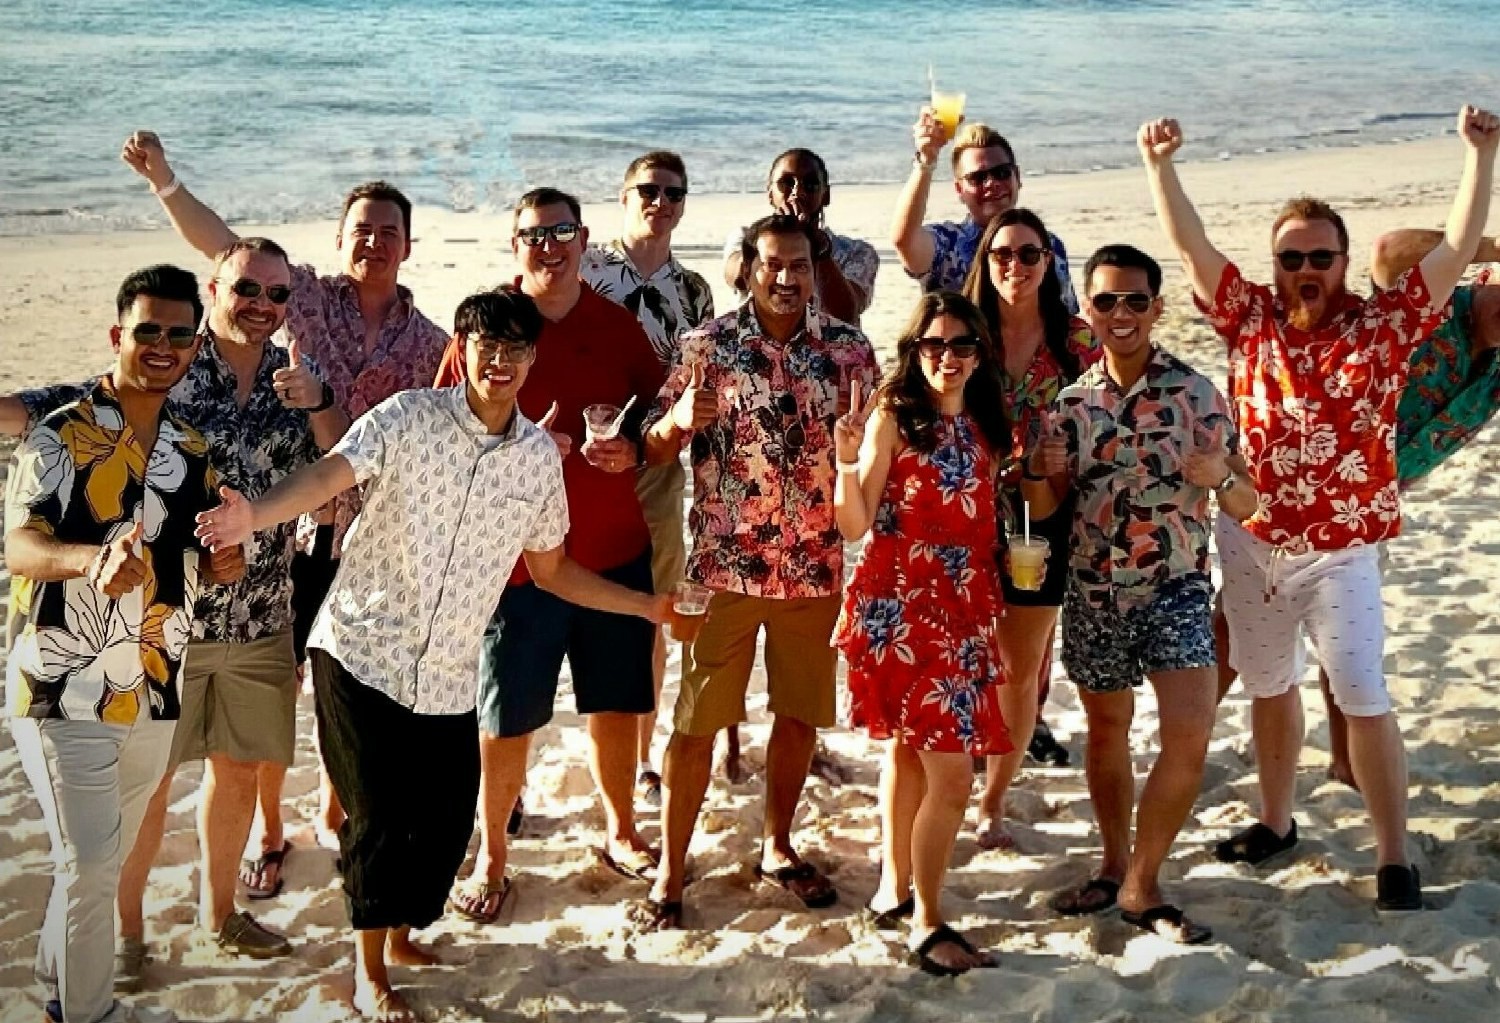 Members of our Technology Solutions practice connect on the beach in the Bahamas